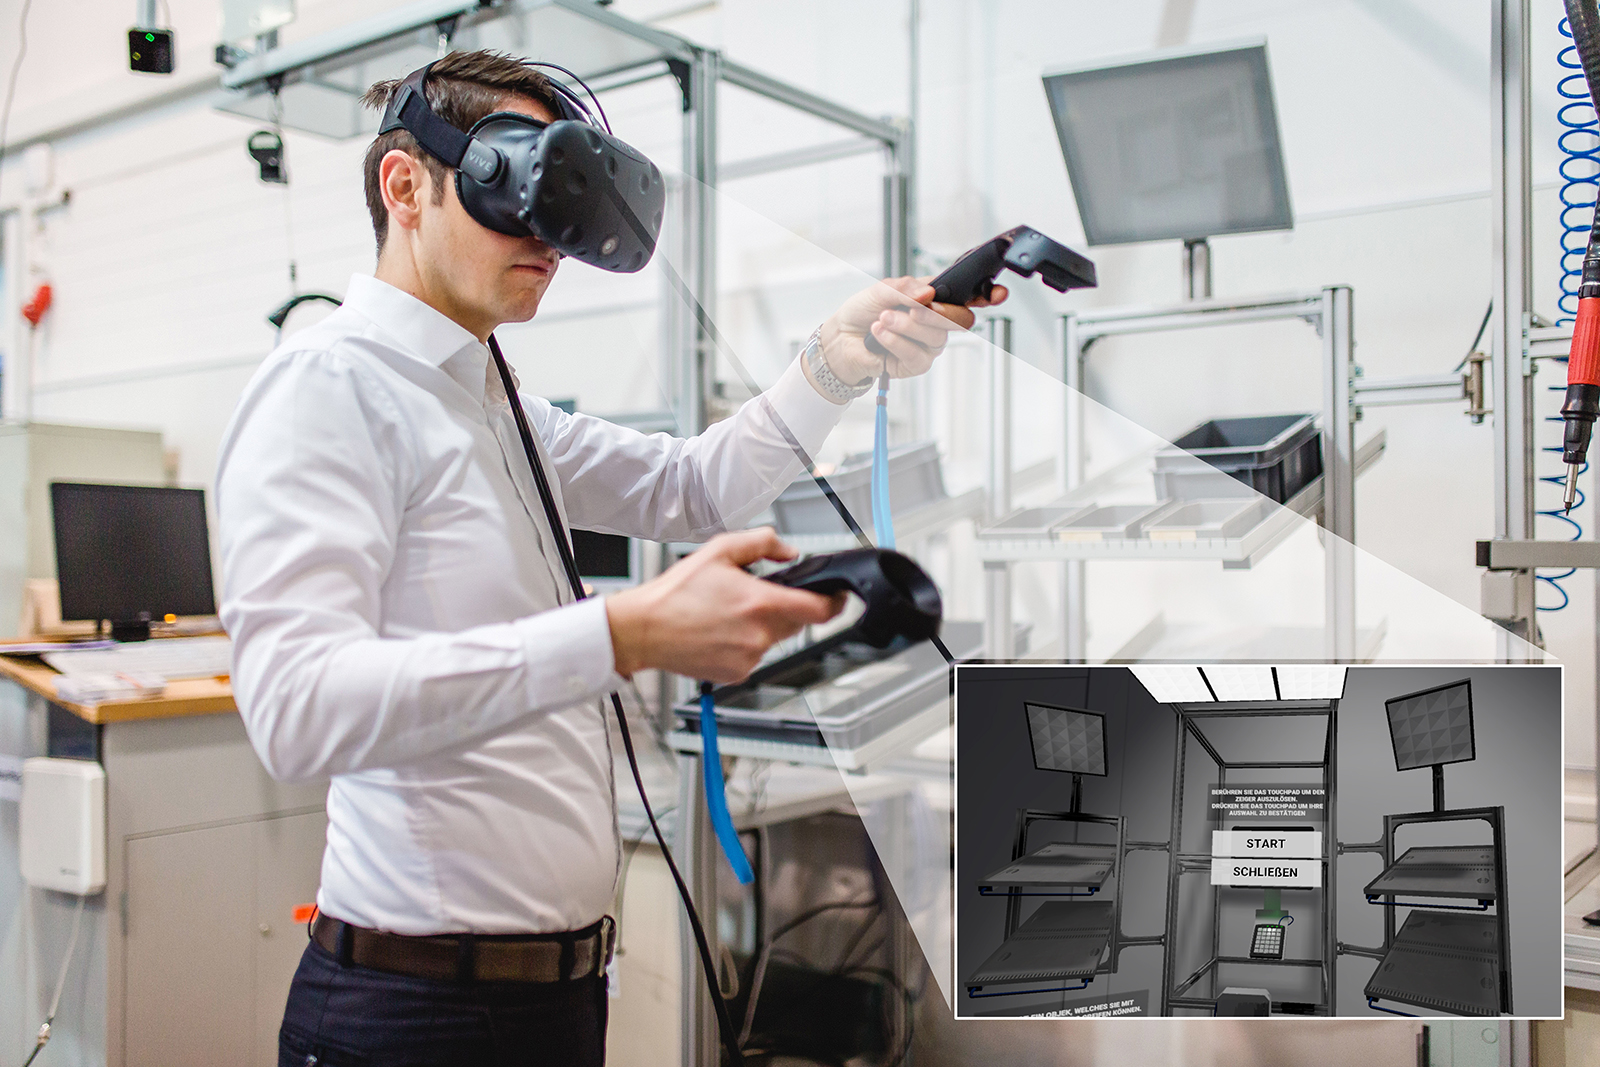 Future Work Lab: augmented and virtual reality applications enable cost-effective planning and a faster way to adapt production systems in the event of disruptions on the shop floor.